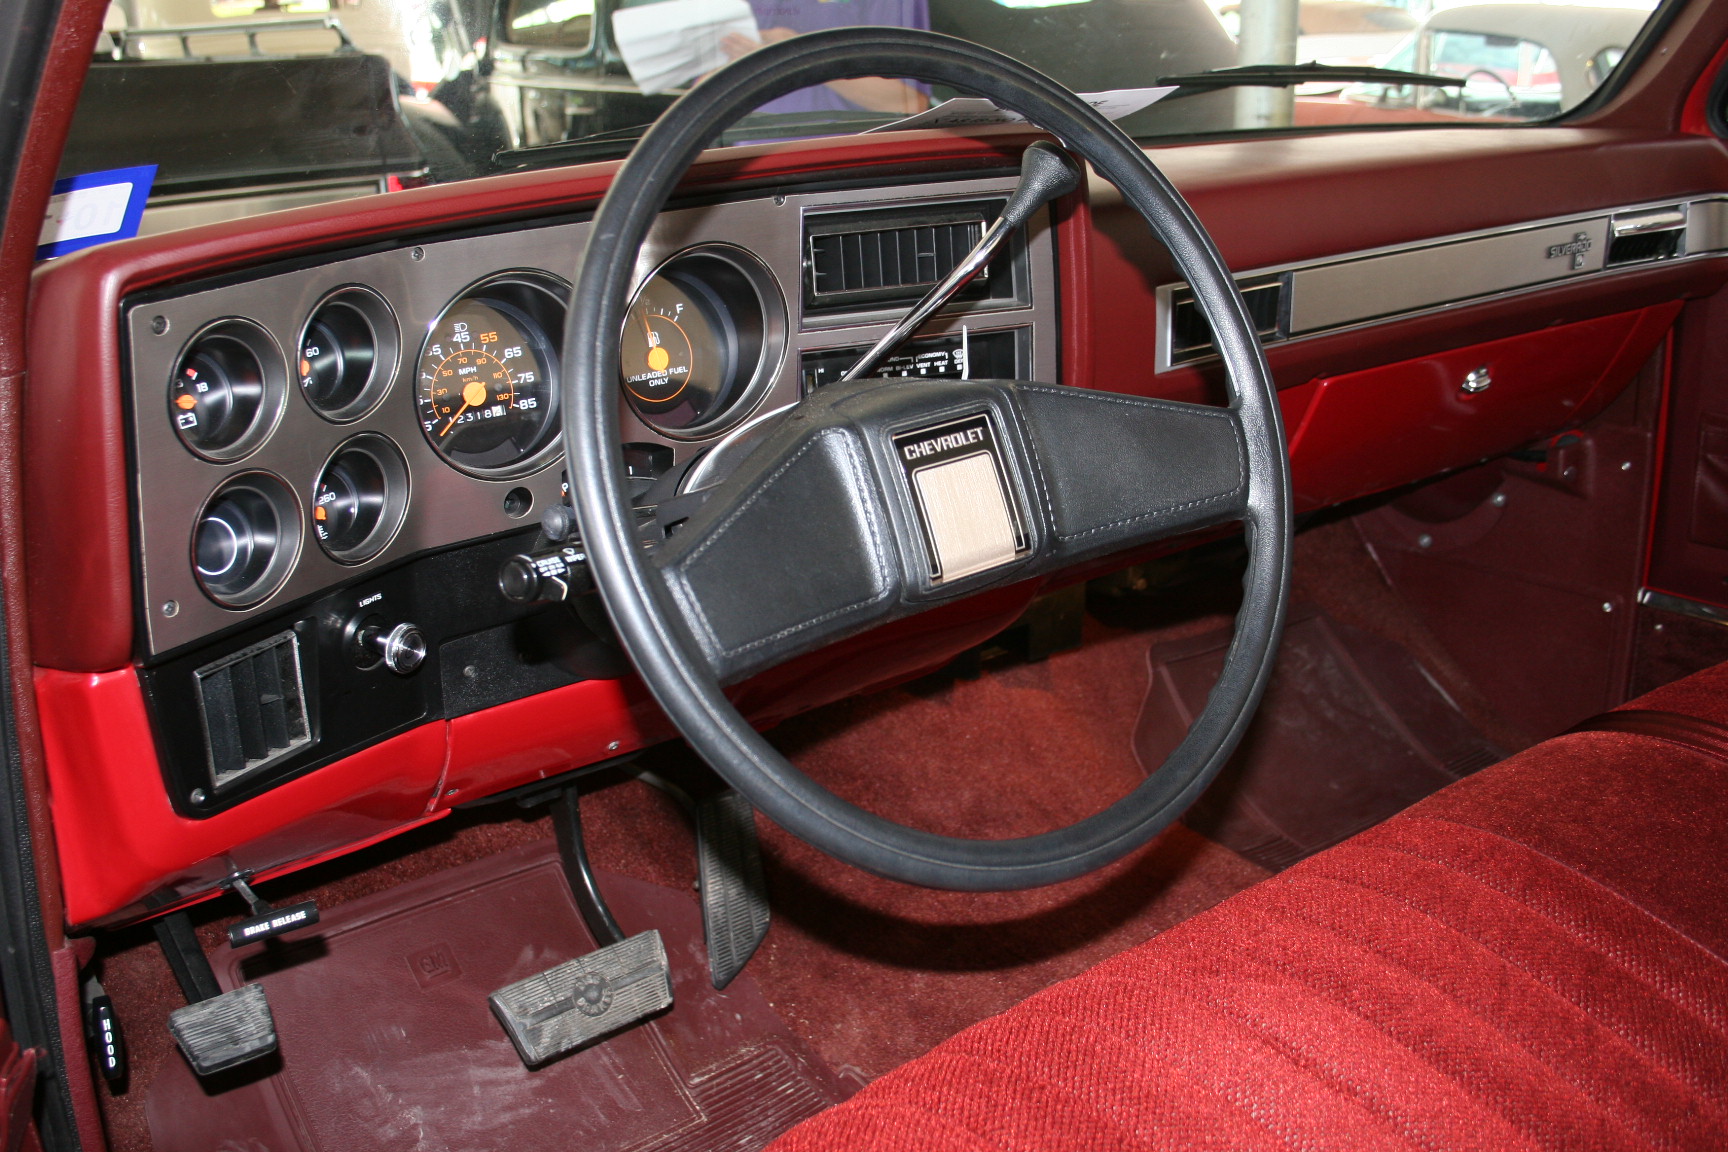 4th Image of a 1986 CHEVROLET C10